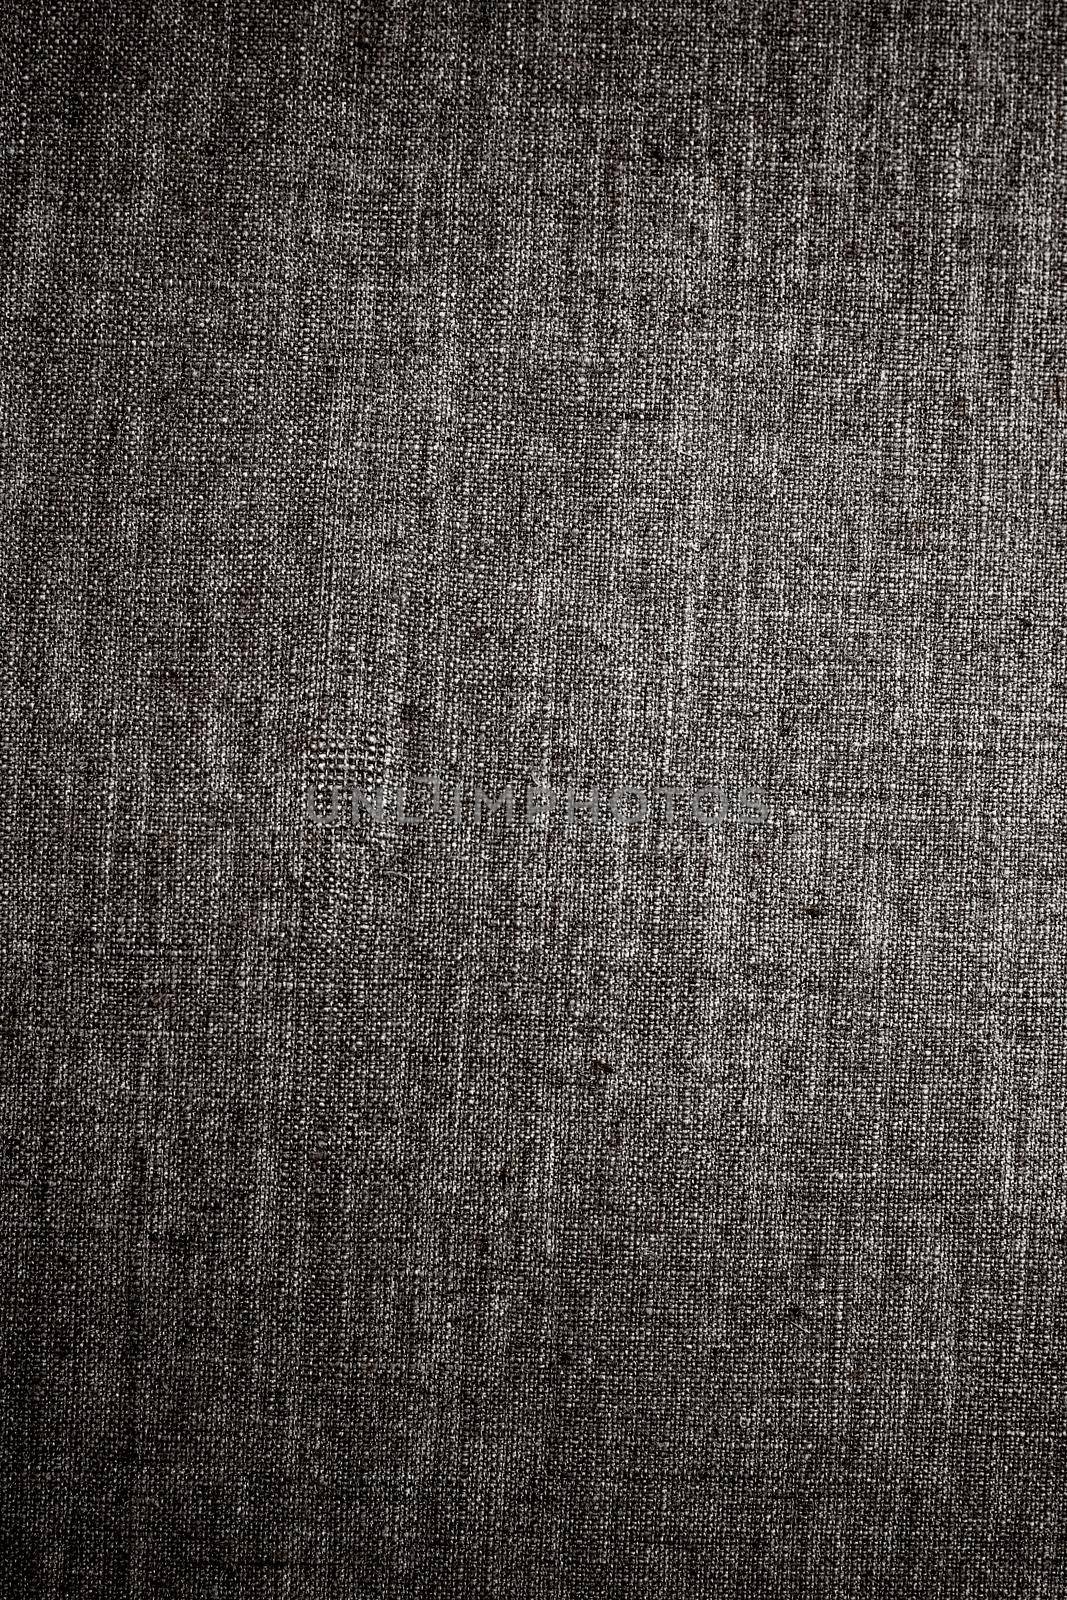 Decorative dark linen fabric textured background for interior, furniture design and art canvas backdrop by Anneleven